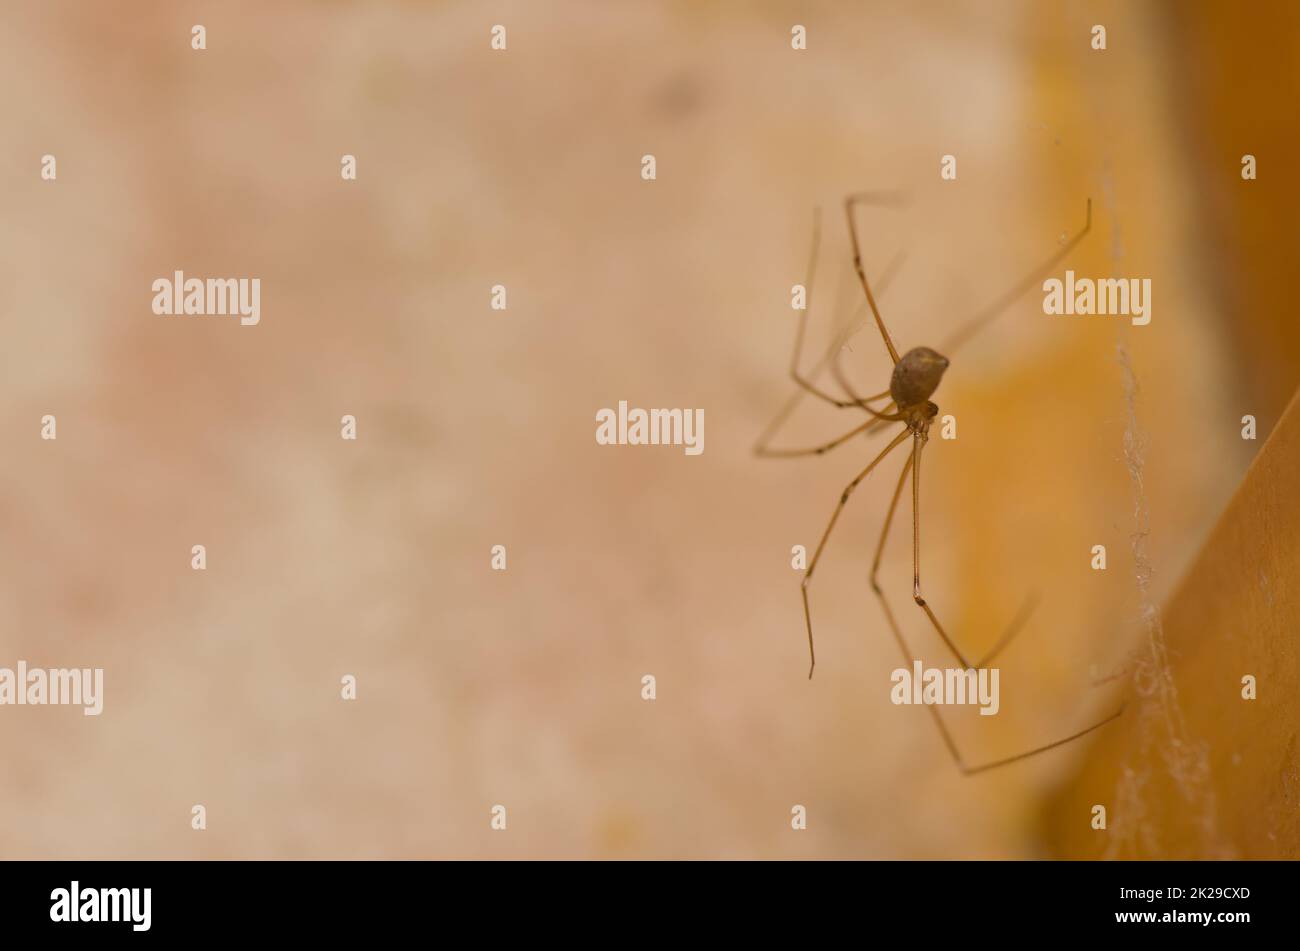 Daddy long-legs spider Pholcus phalangioides. Stock Photo